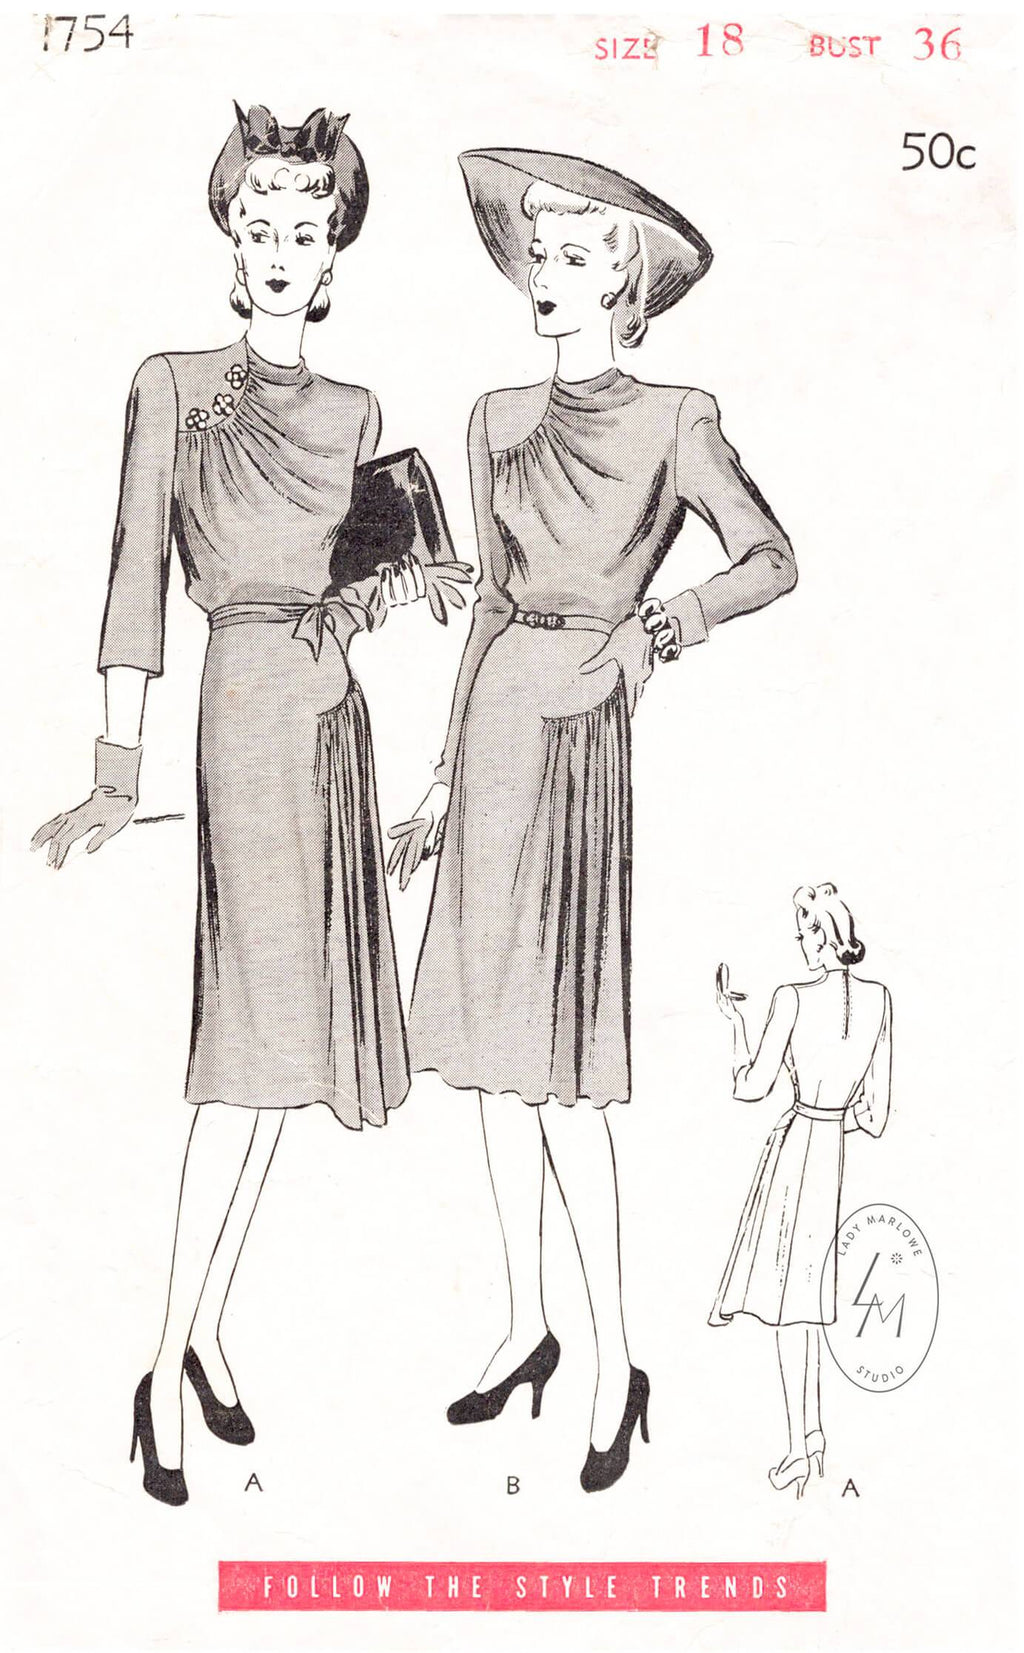 1940s dress vintage sewing pattern Butterick 1754 draped collar curved seams reproduction